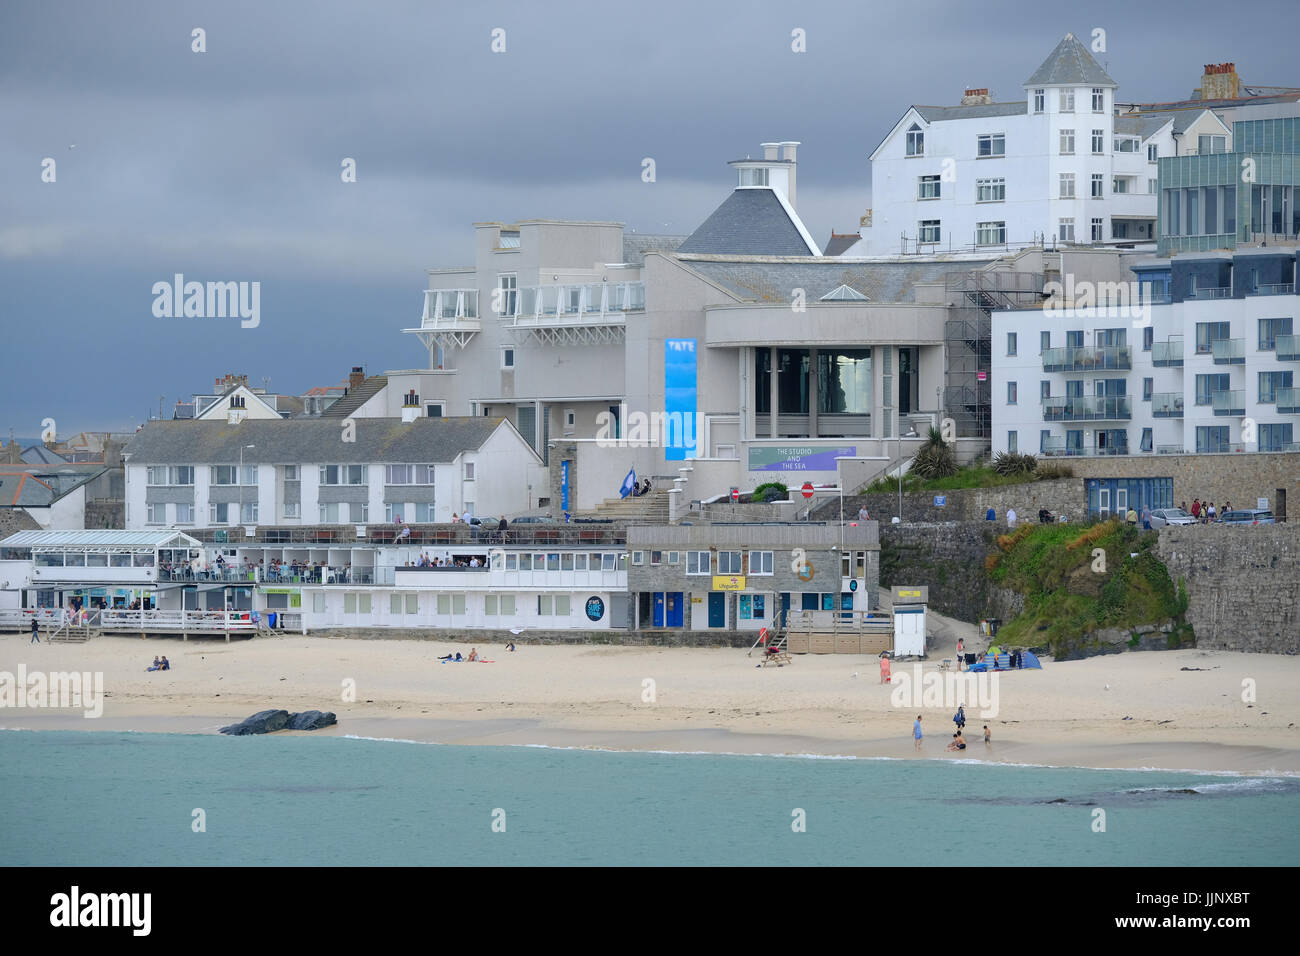 The Tate, St Ives, Cornwall Stock Photo